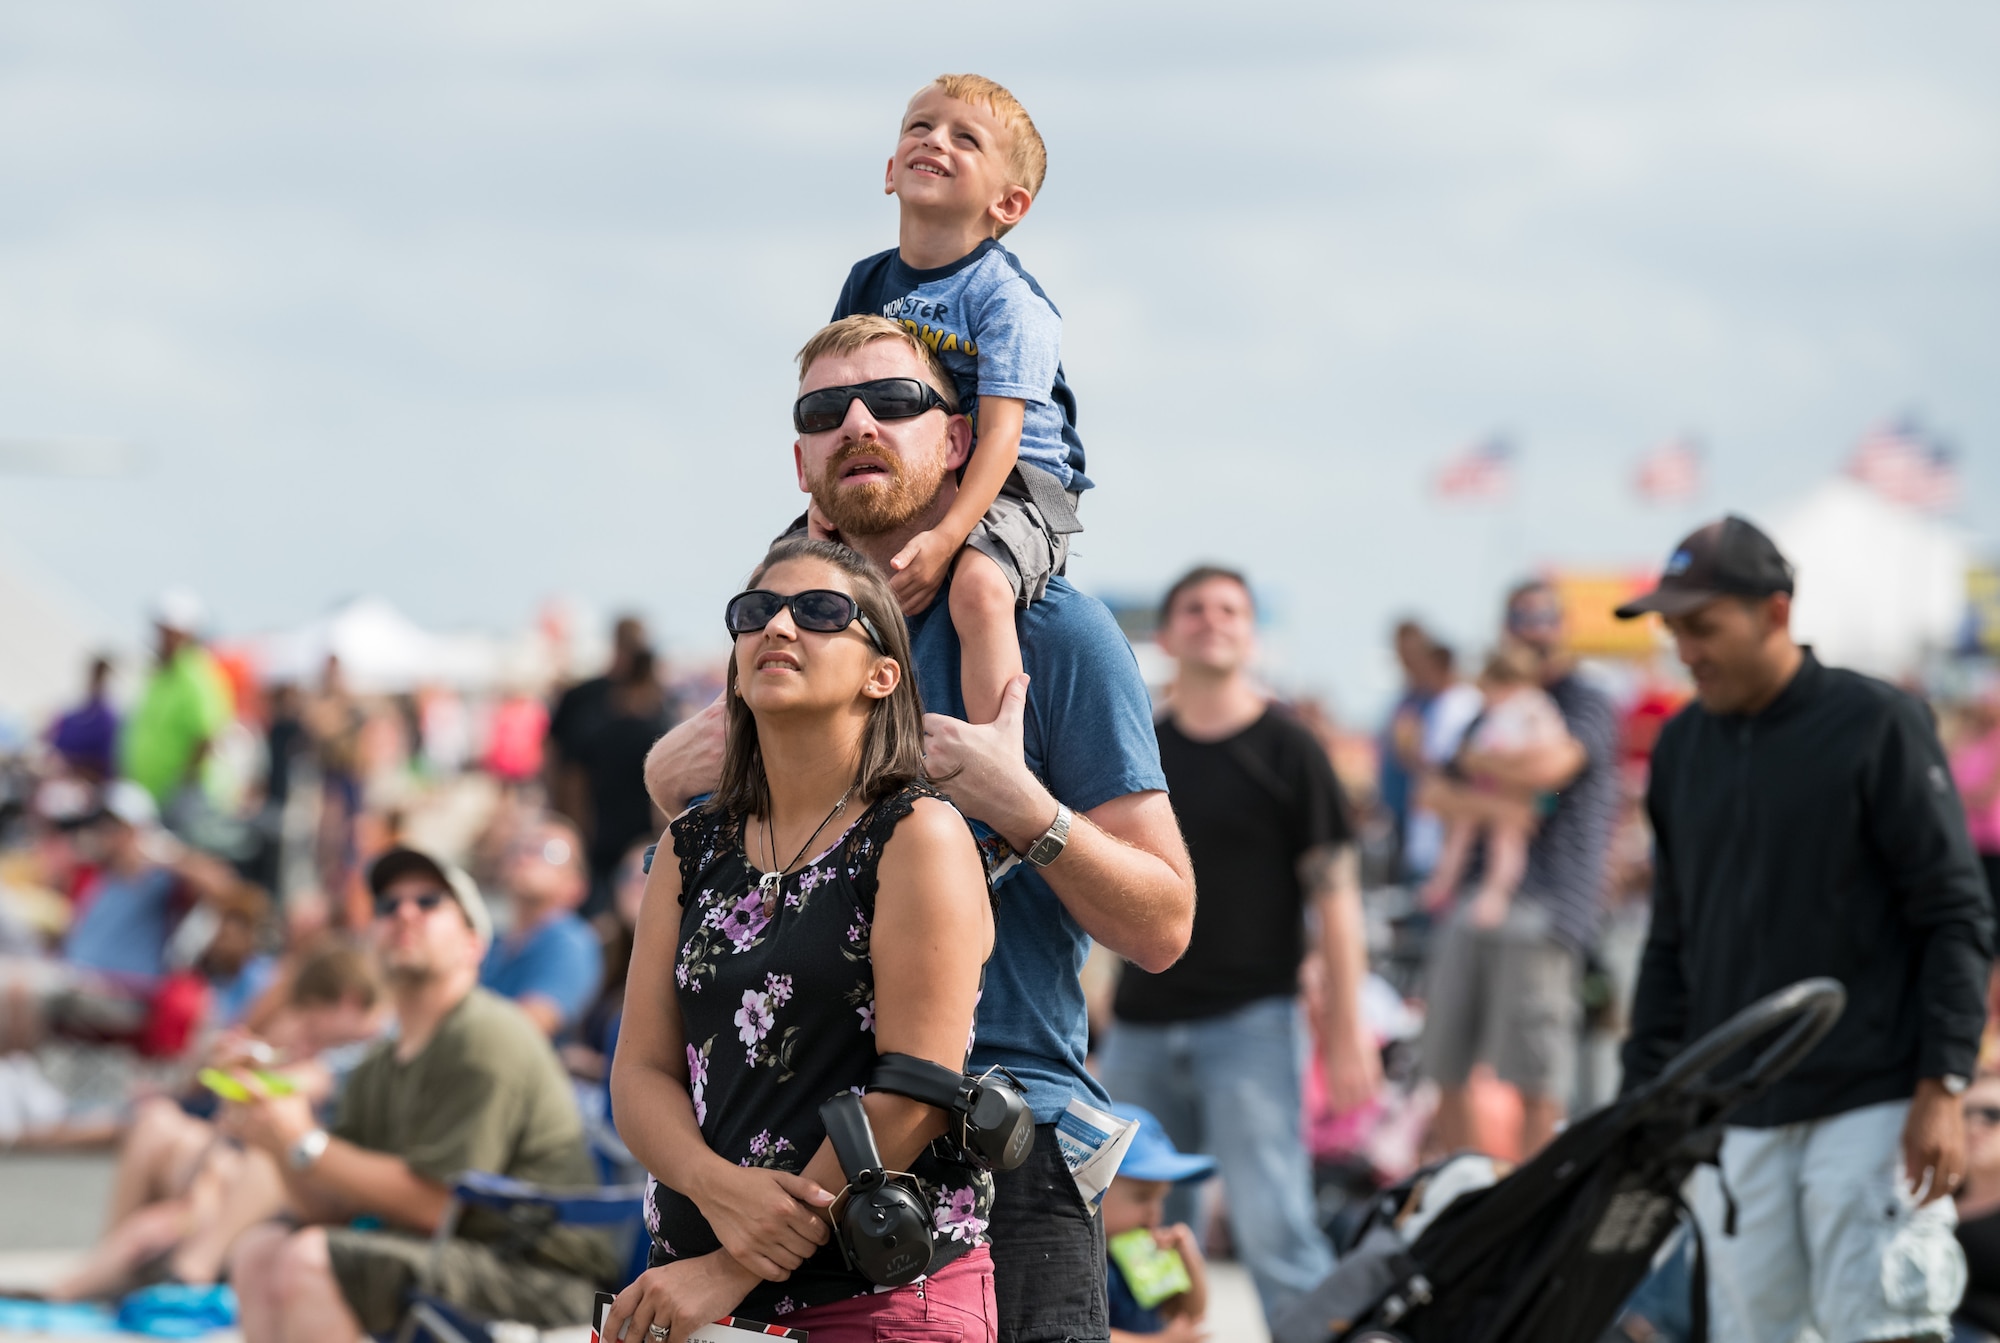 A family watches the F-22 Raptor aerial demonstration during the first day of the 2019 Thunder Over Dover Air Show Sept. 14, 2019, on Dover Air Force Base, Del. Spectators came to the base to see aerial performances and static displays and speak with local Airmen about their role in providing rapid global airlift. (U.S. Air Force photo by Roland Balik)